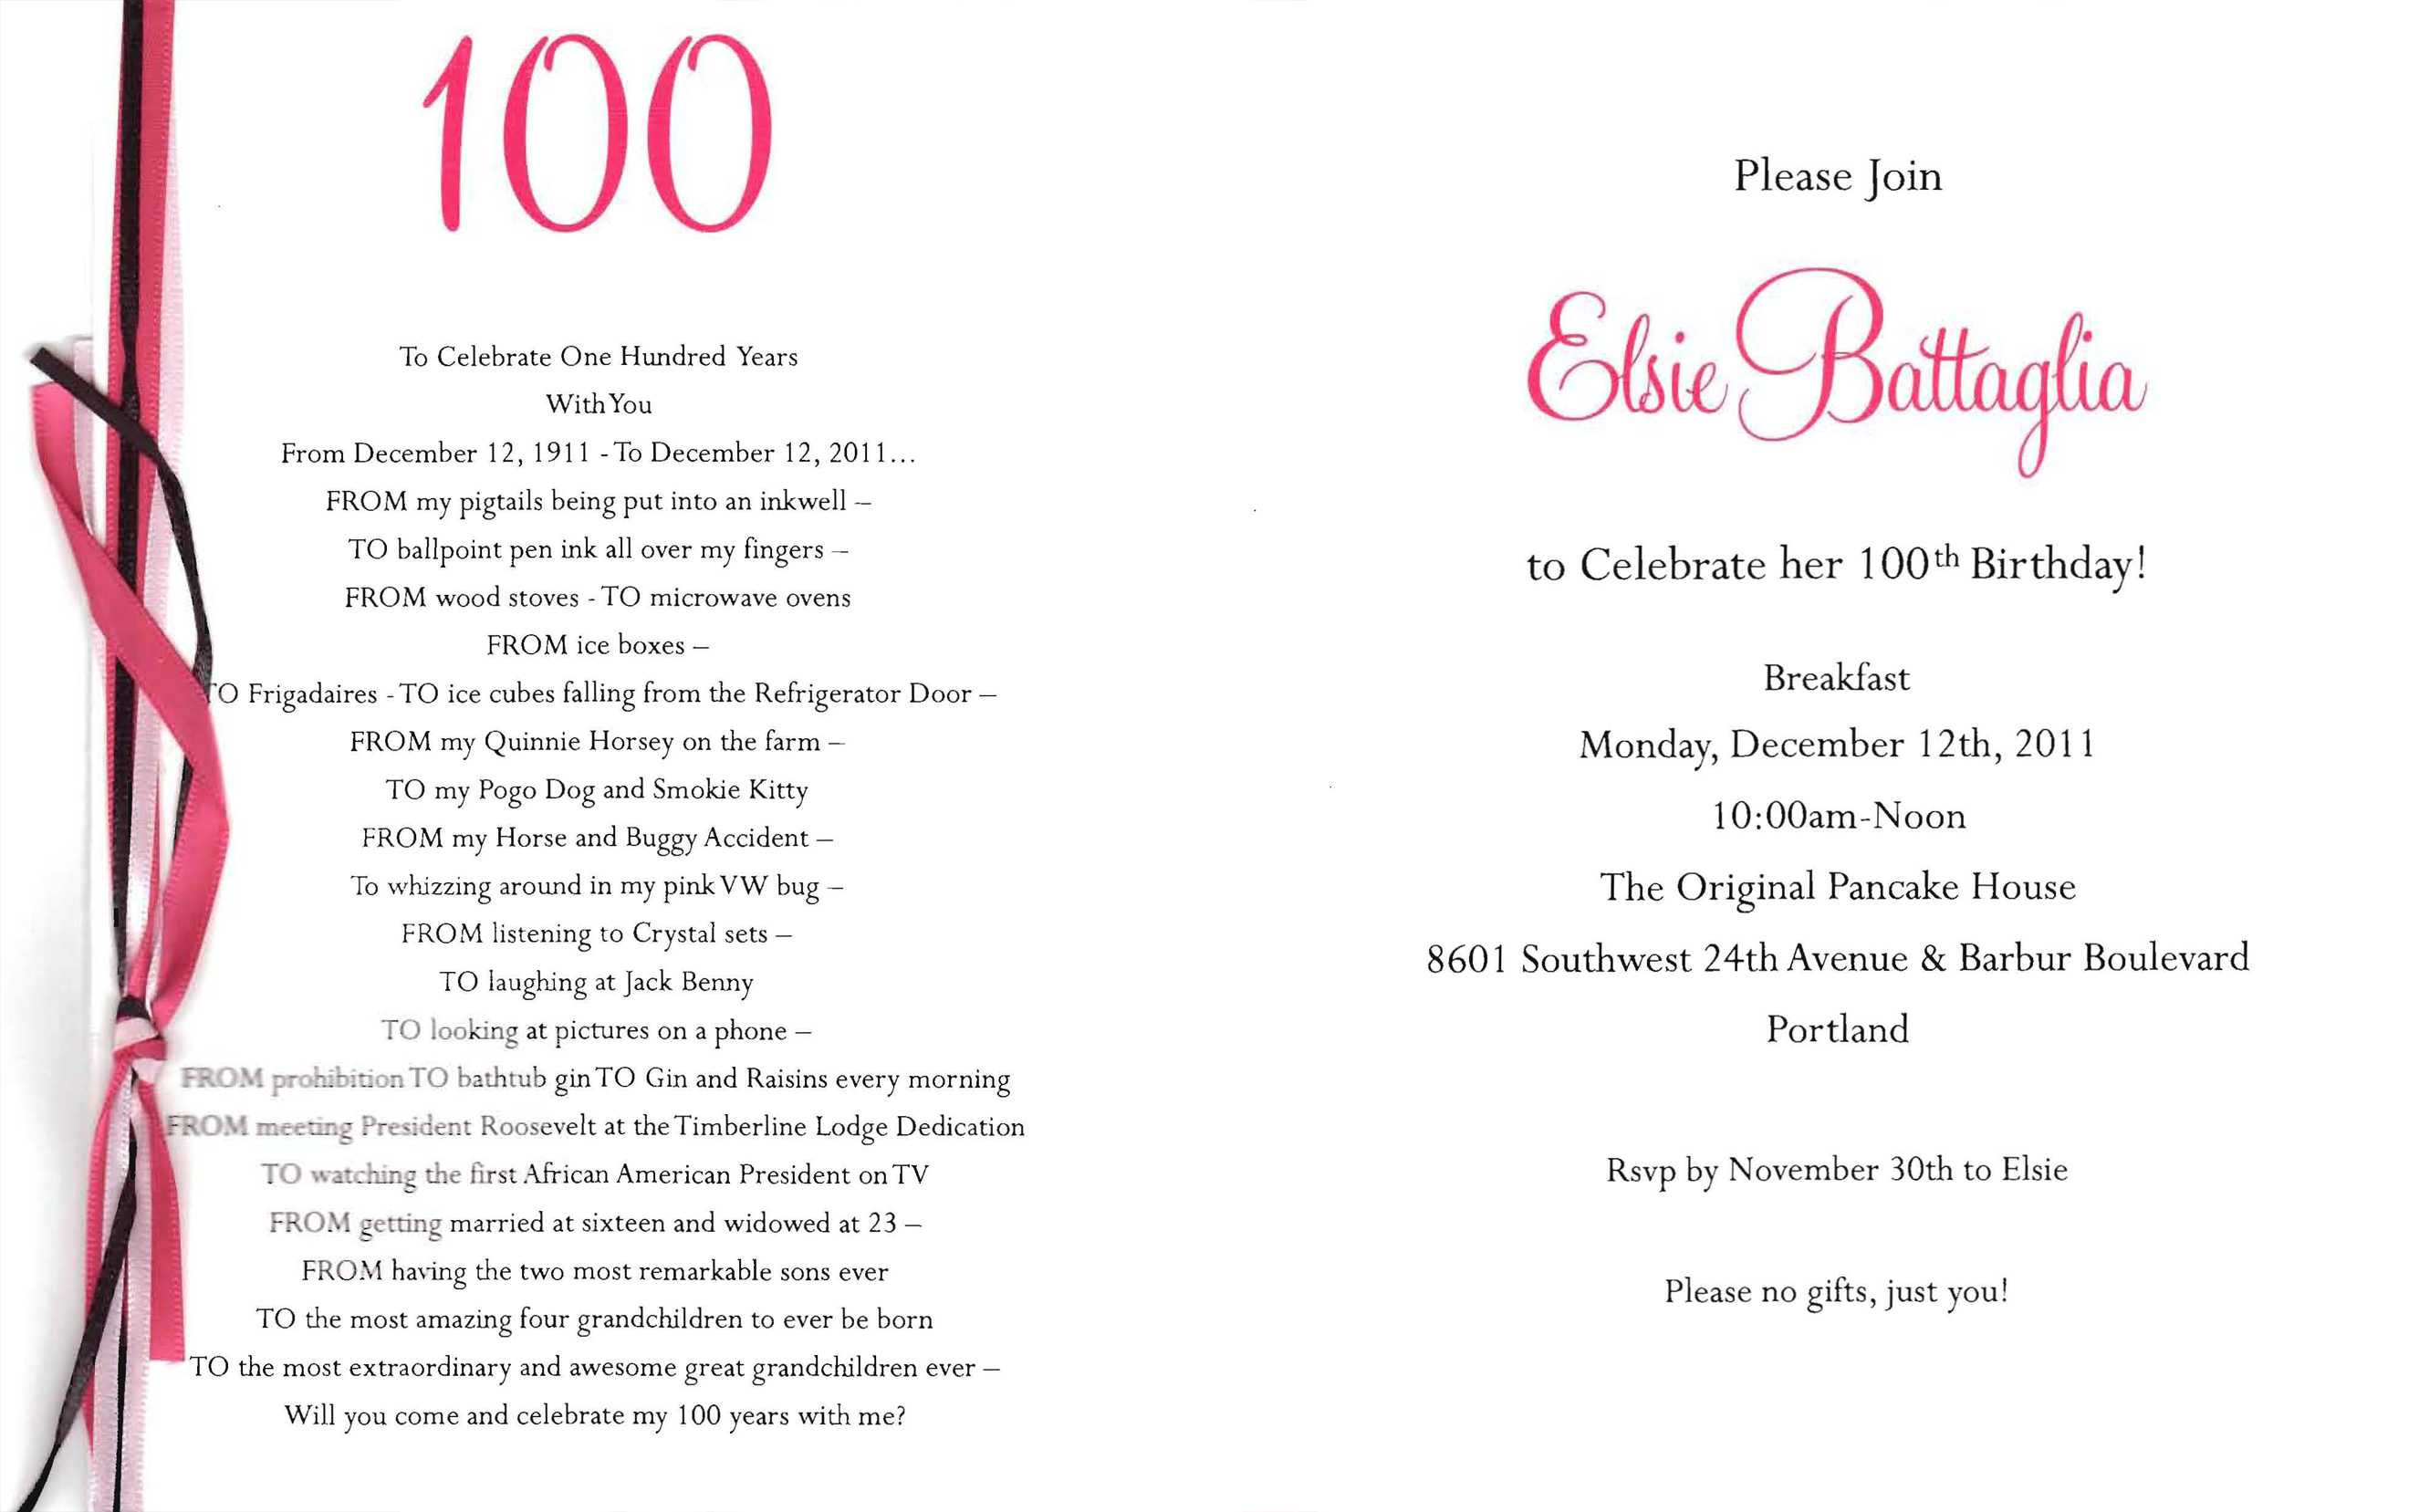 My grandmother Elsie Battaglia’s 100th birthday party coming up